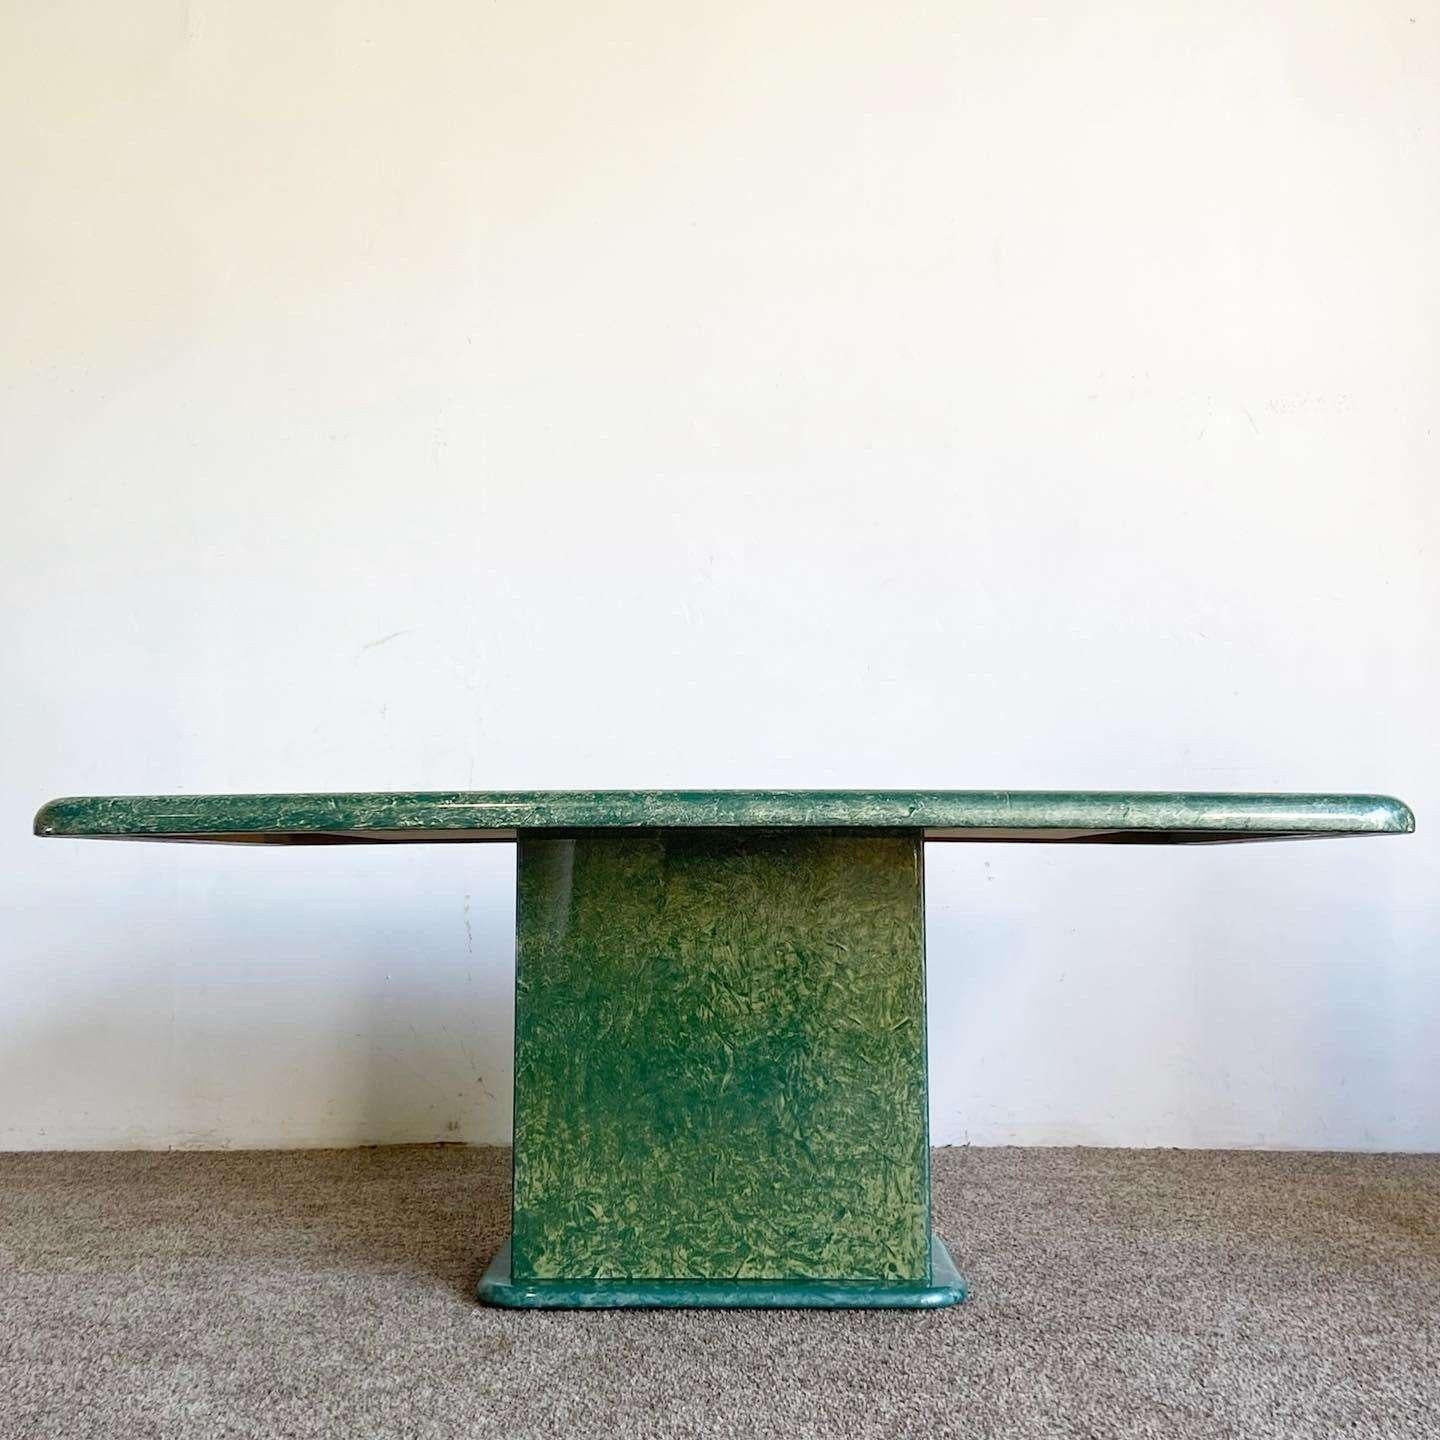 Wonderful vintage art deco rectangular dining table. Features a faux green marble epoxied finish through the surfaces of the table and pedestal base. 